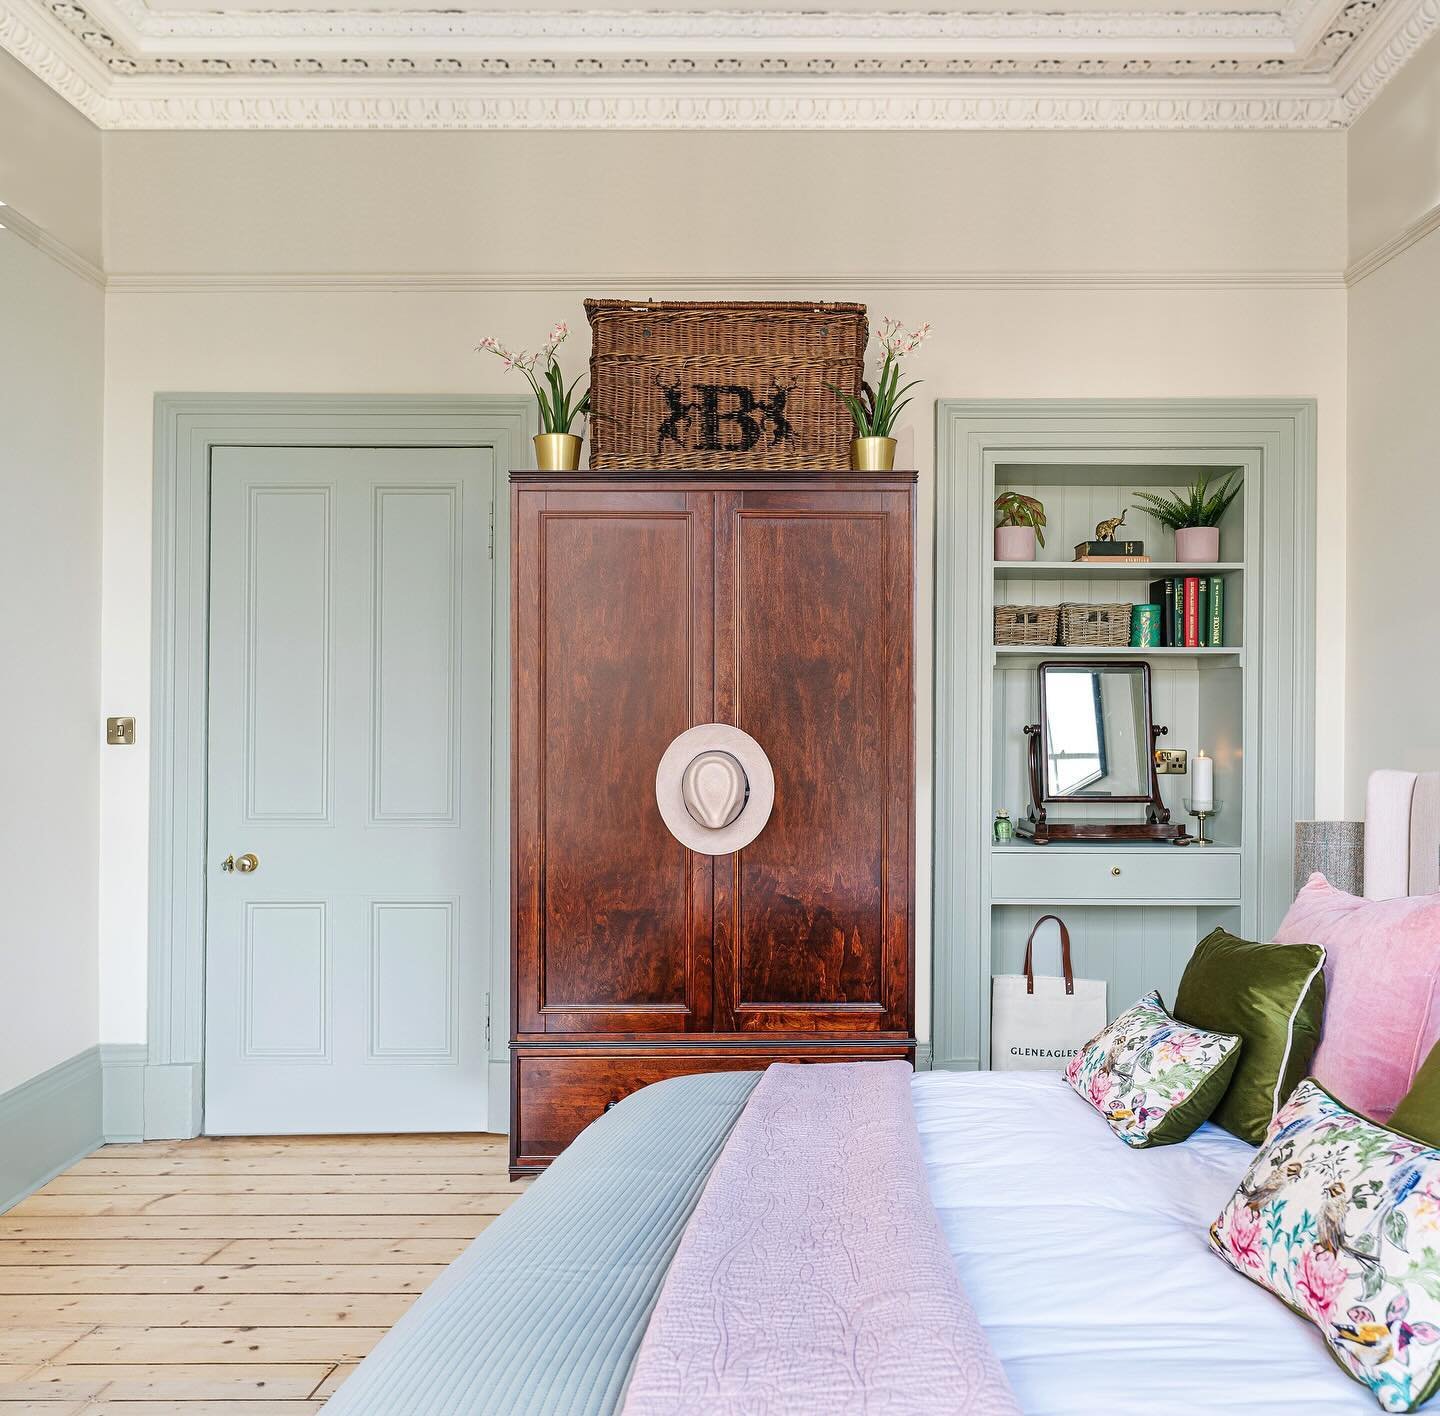 C E N T R E  S T A G E !!

Seems I like a full frontal (see last post)!! 

Not sure if this shot actually captures the breadth and height of this large bedroom (that basket is about a metre wide) but I do like the symmetry and particularly here, what